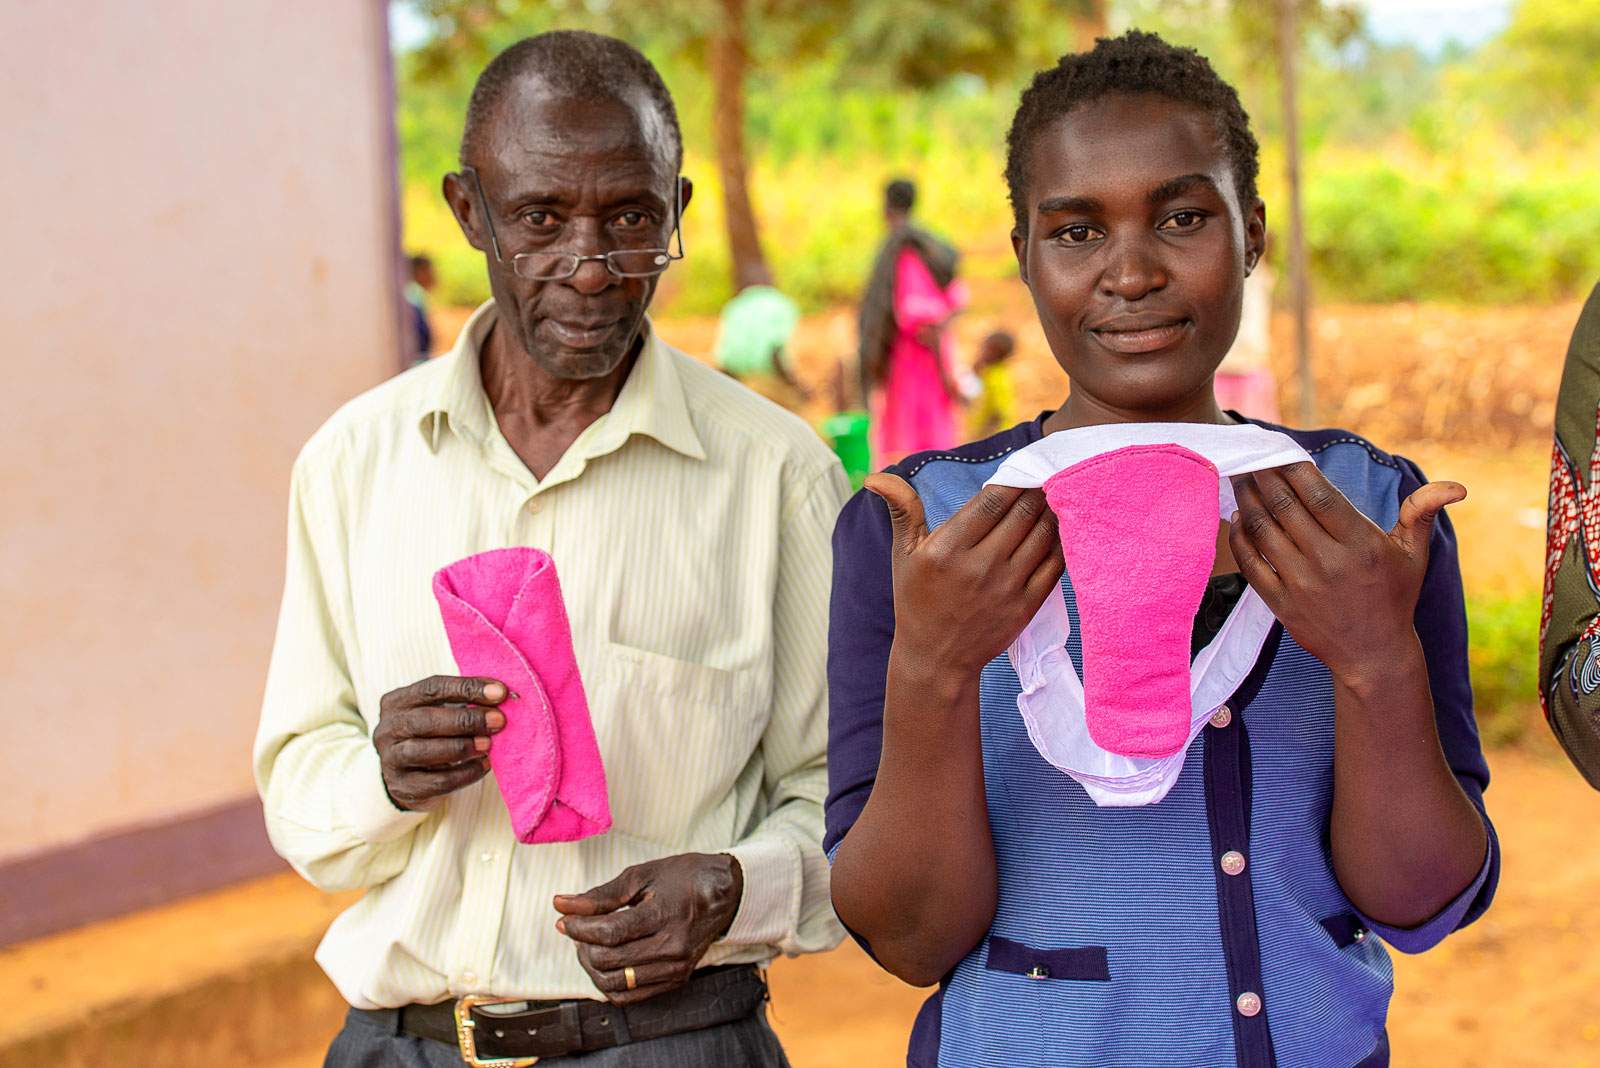 In Uganda, a pack of sanitary pads costs roughly A